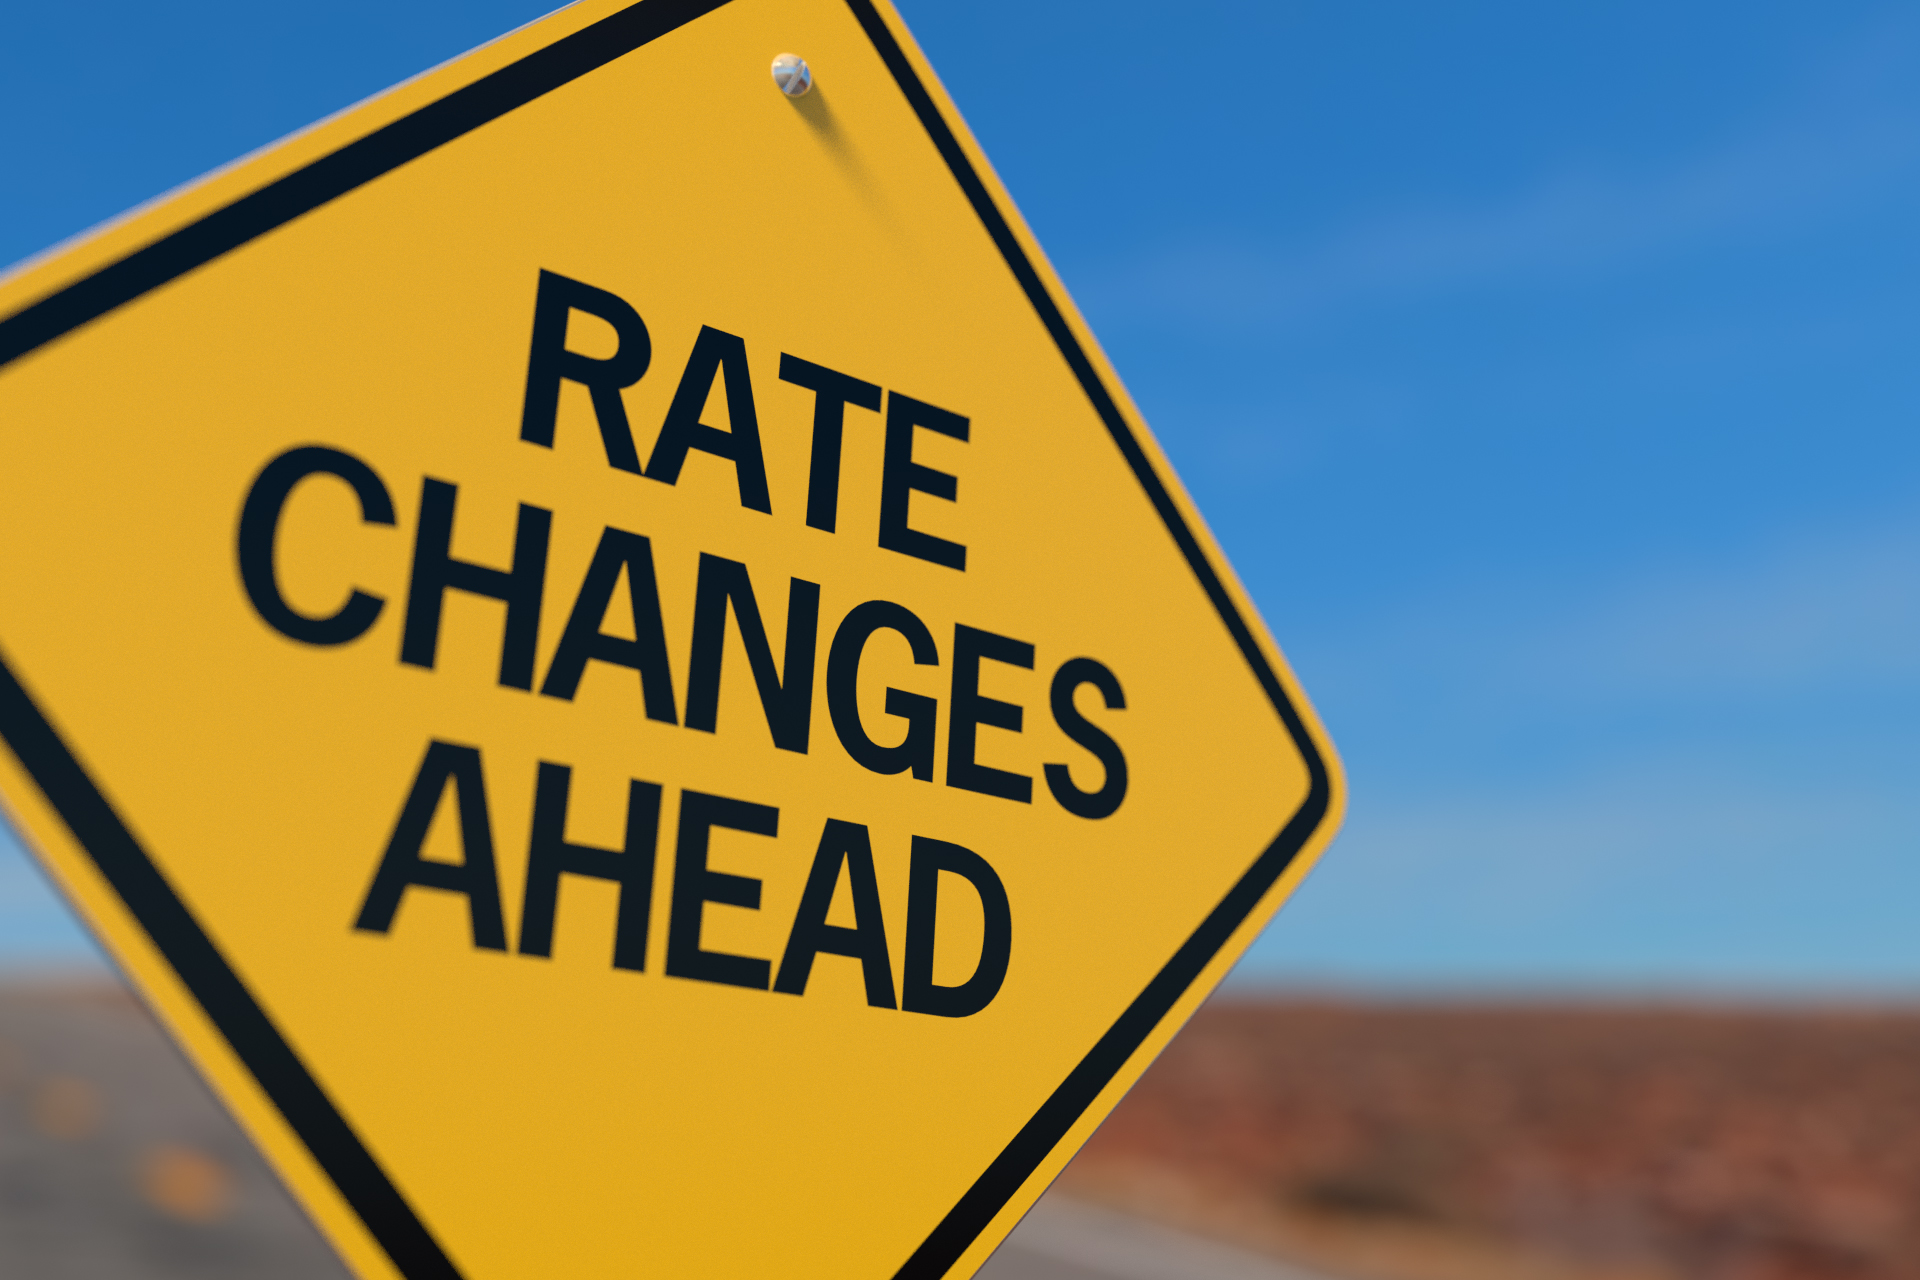 Rate Changes Ahead road sign free image download